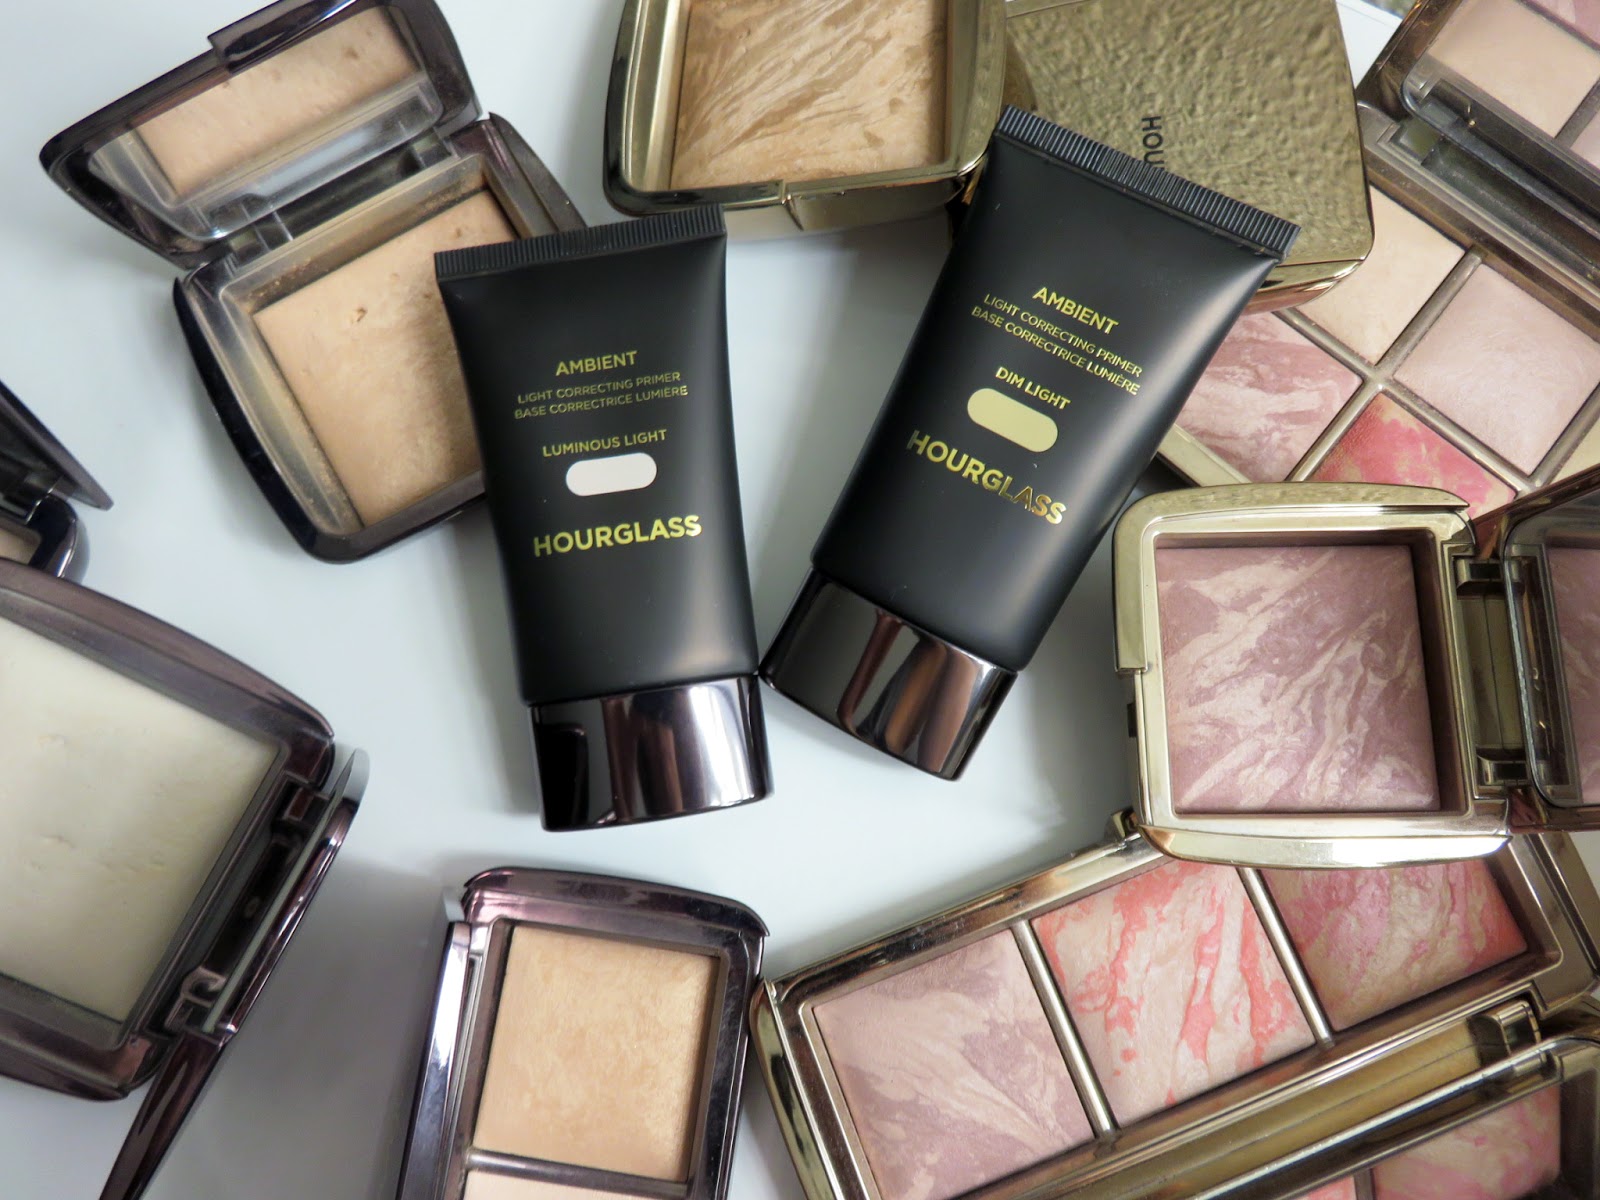 Review | Hourglass Ambient Light Correcting Primer in Luminous Light and Dim Light | IS MY